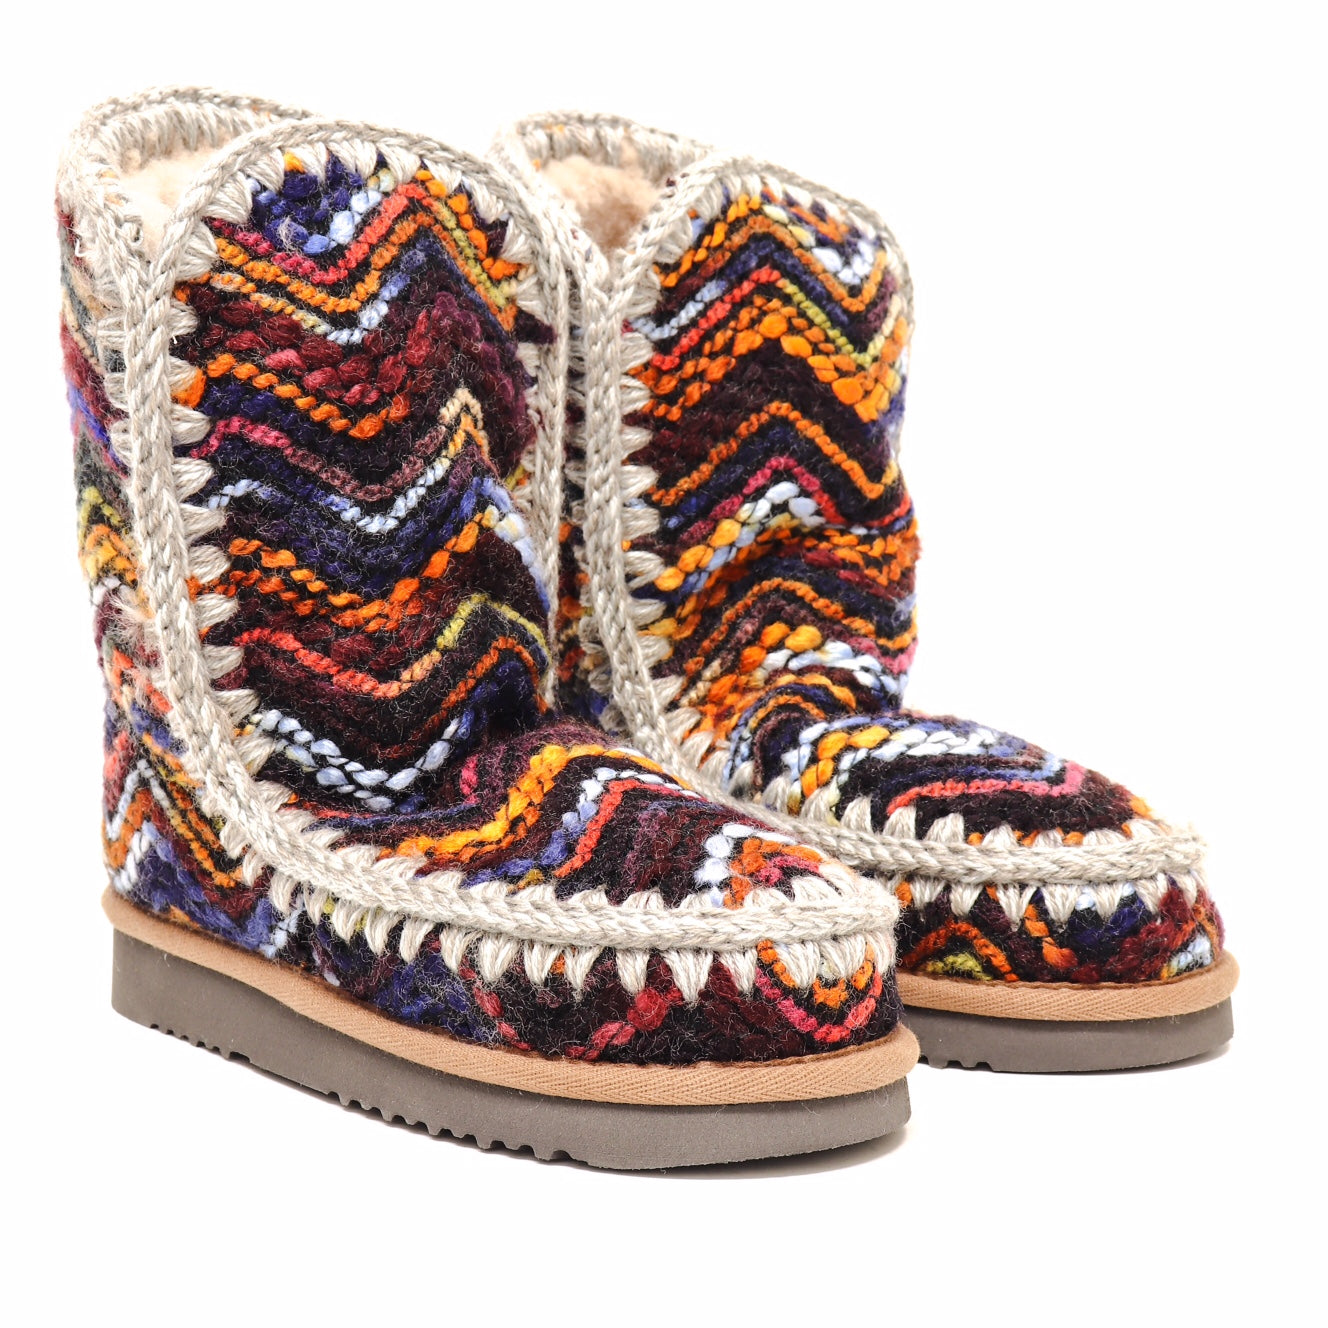 Mou Eskimo Wool Fabric Ankle Boot